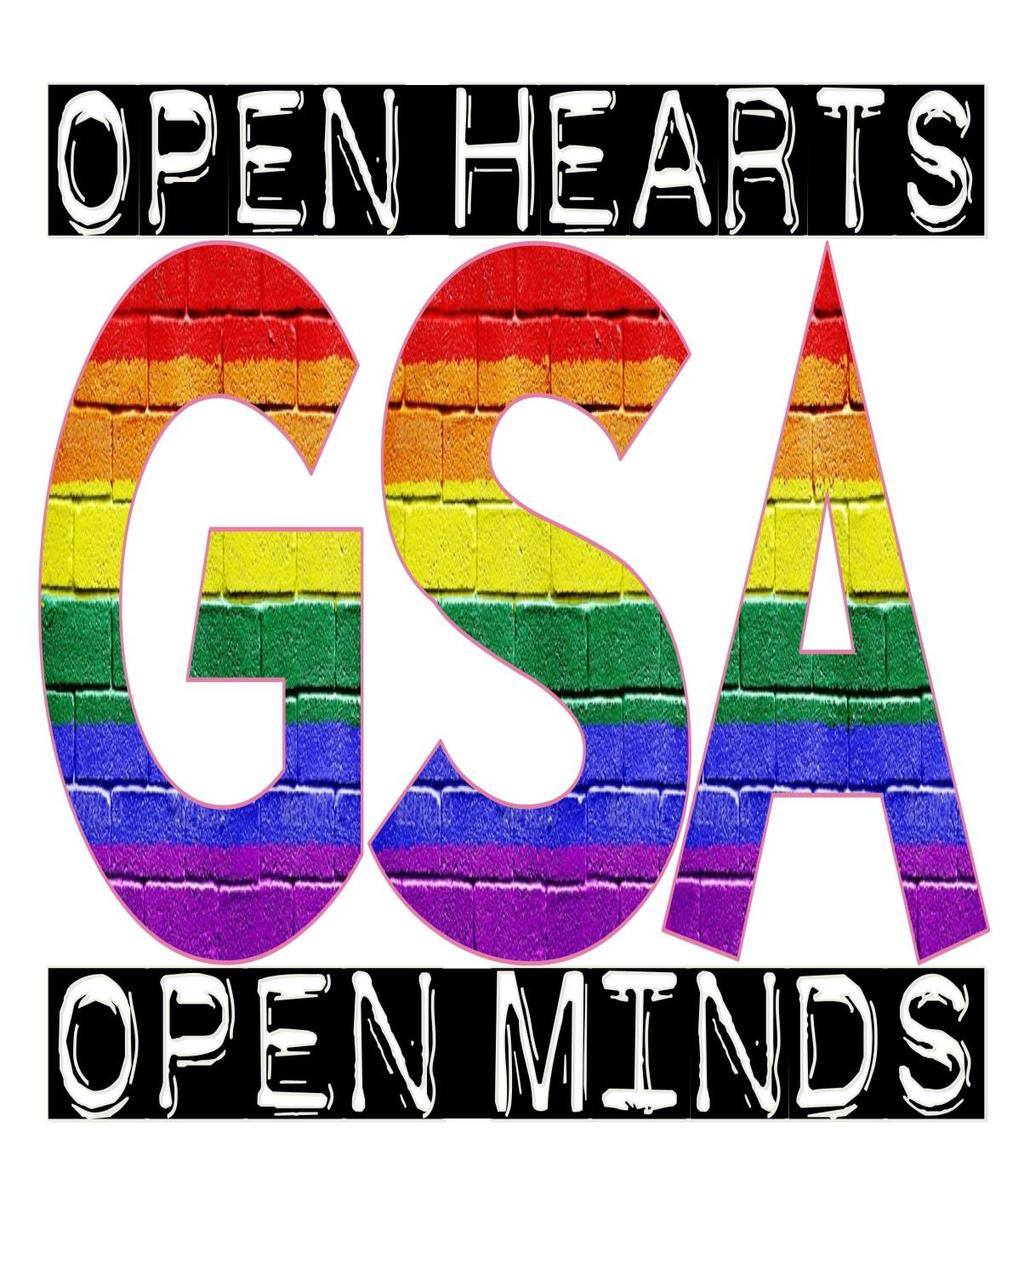 GSA will have a mandatory meeting on Thursday, January 31